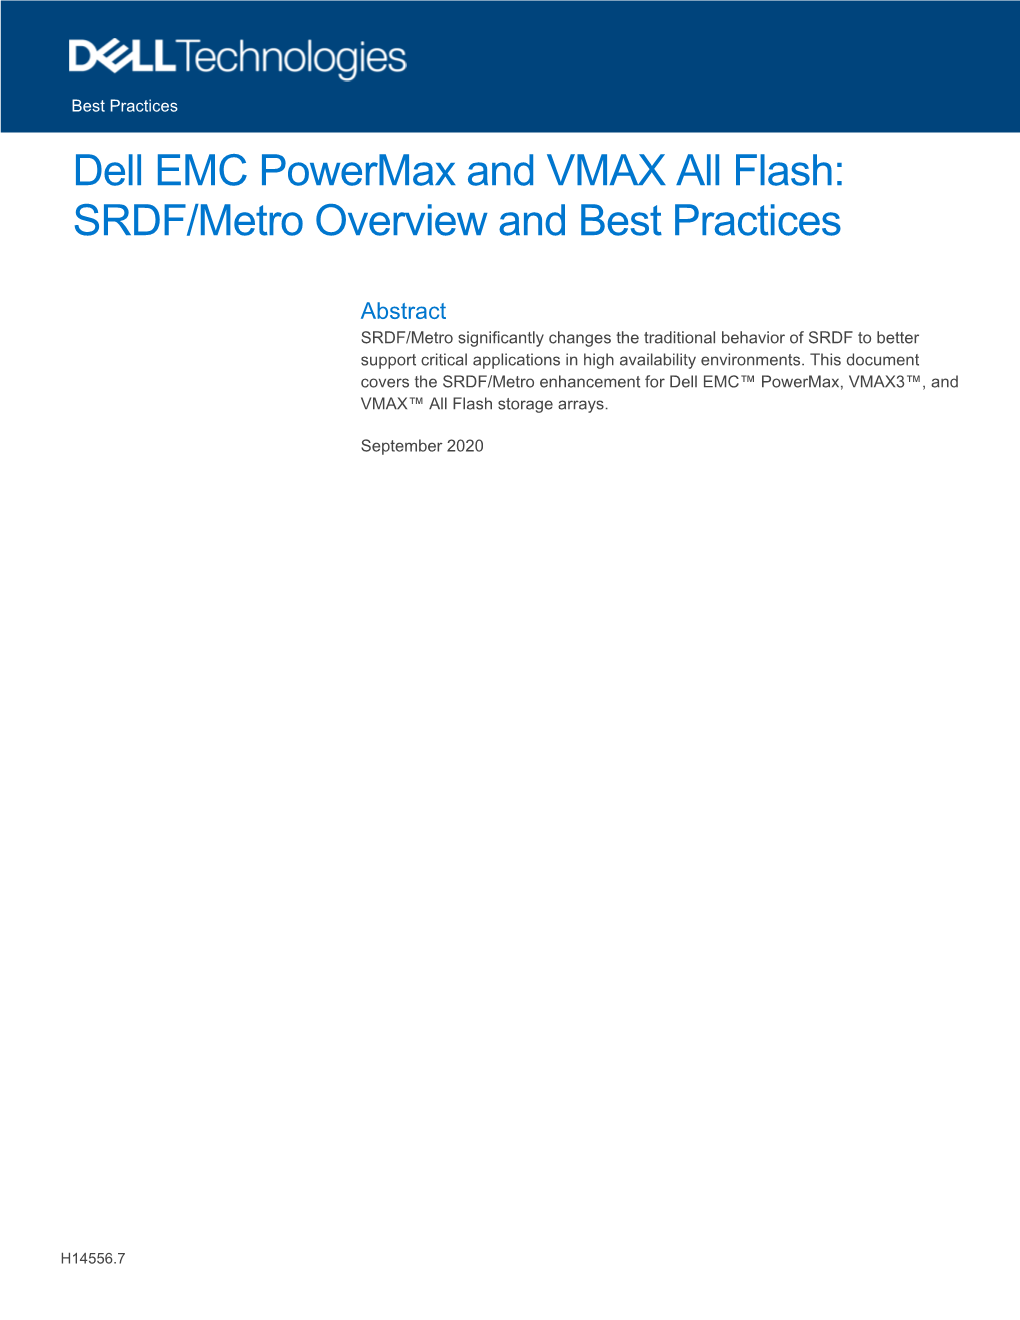 Dell EMC Powermax and VMAX All Flash: SRDF/Metro Overview and Best Practices